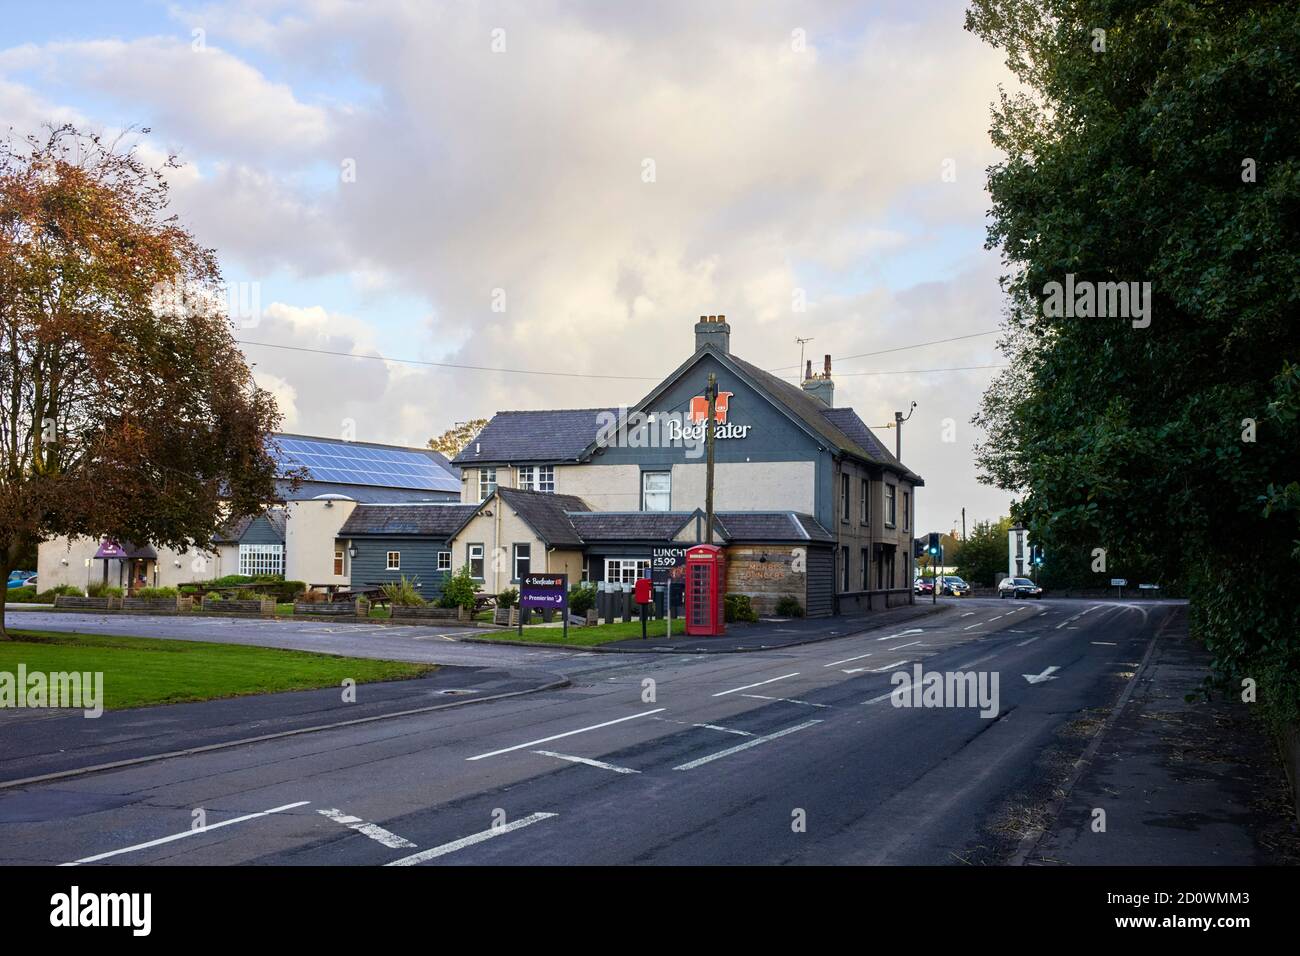 A Beefeater restaurant and Premier Inn at the Morris Dancers in Scarisbrick, Lancashire Stock Photo